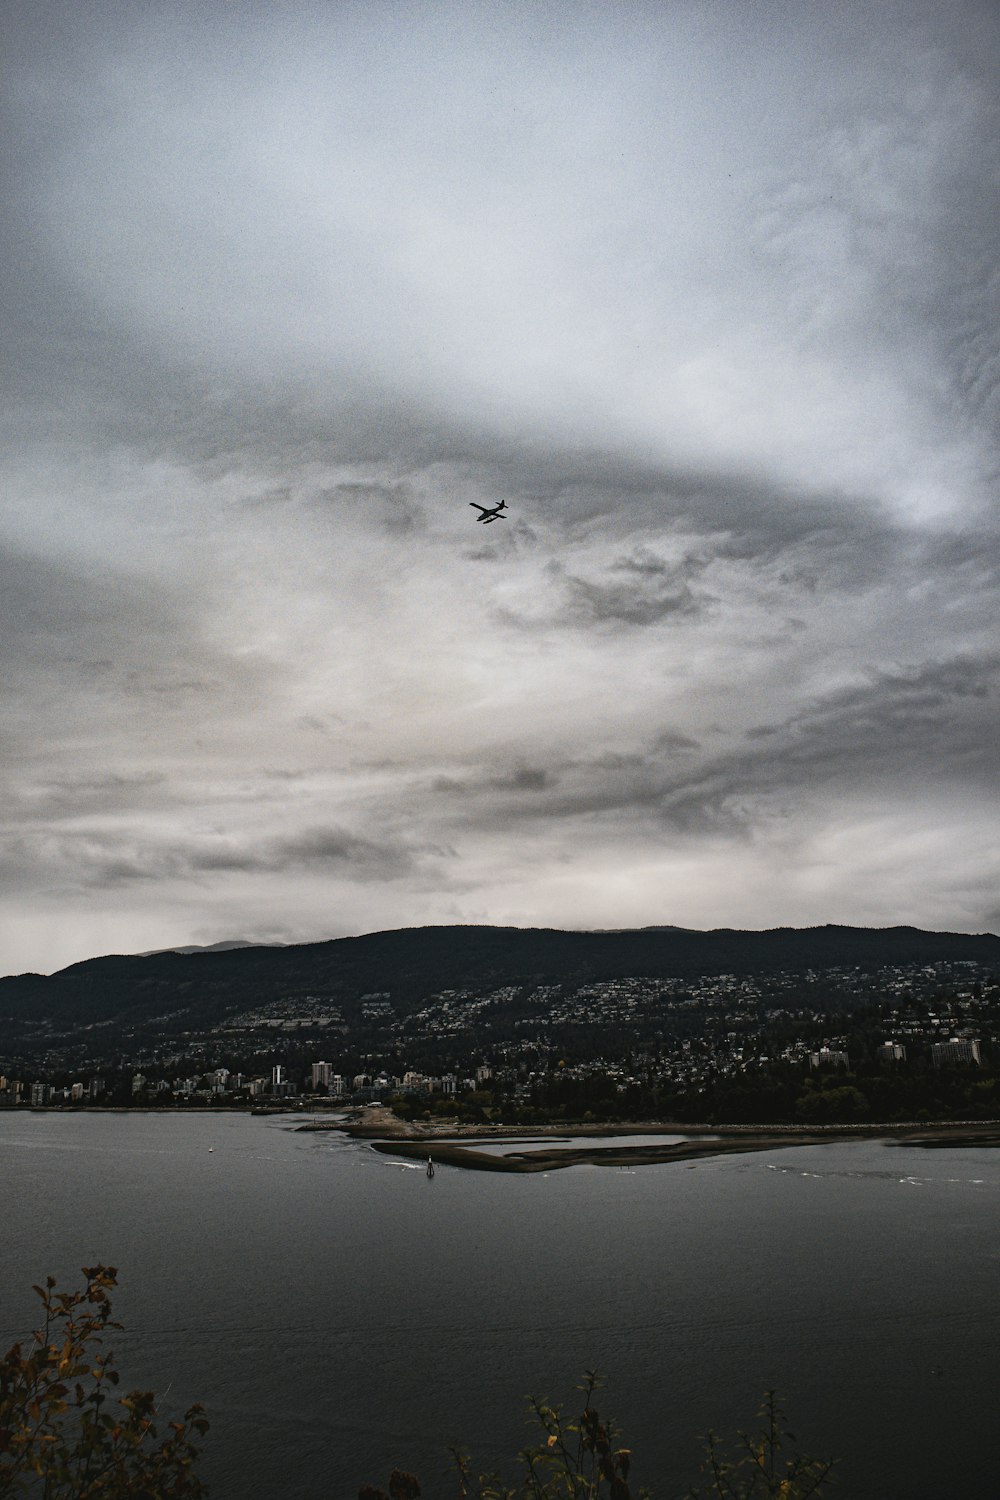 a plane flying over a body of water under a cloudy sky